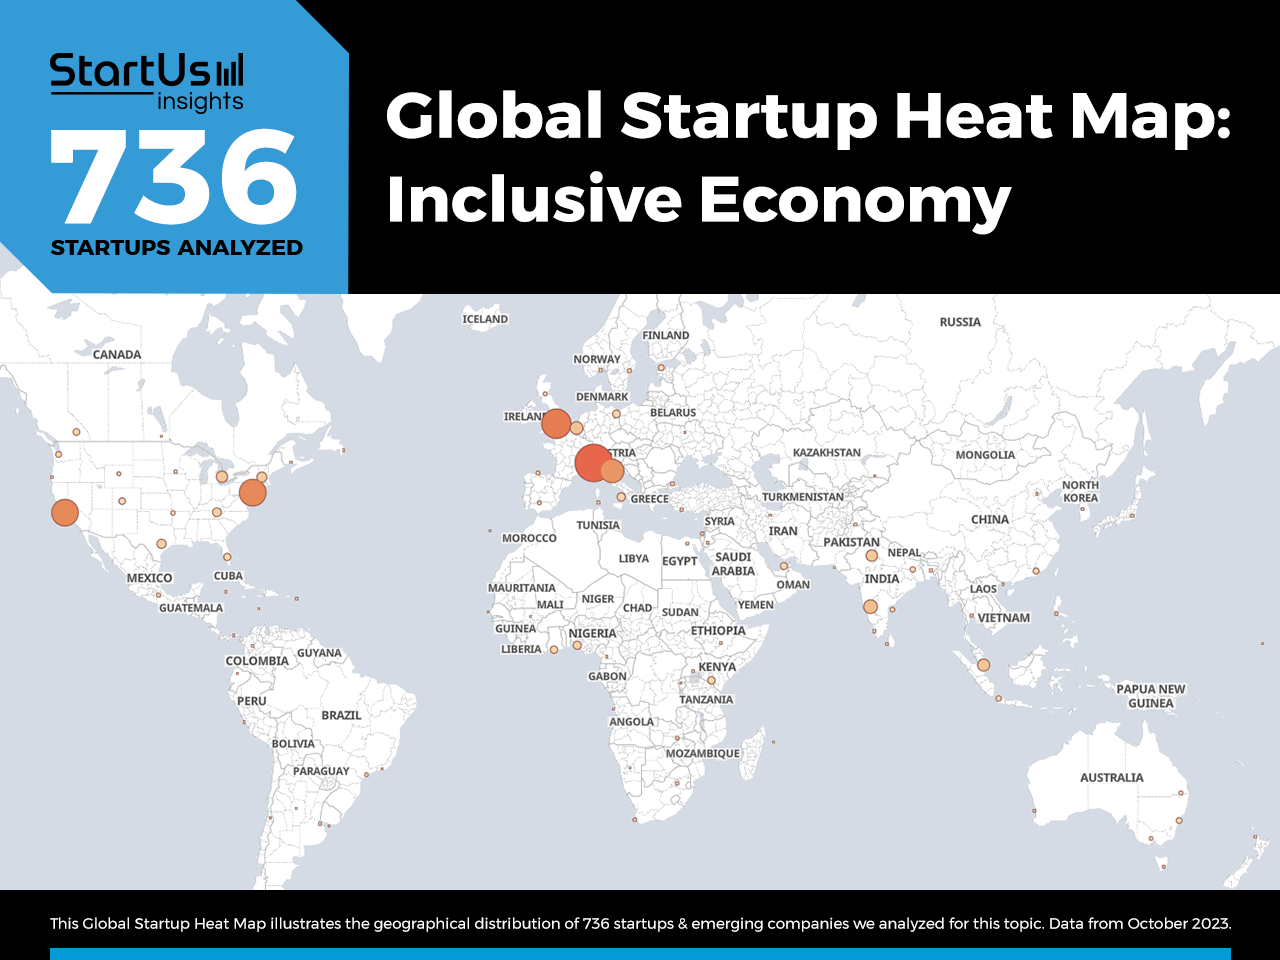 Inclusive-Economy-trends-Heat-Map-StartUs-Insights-noresize